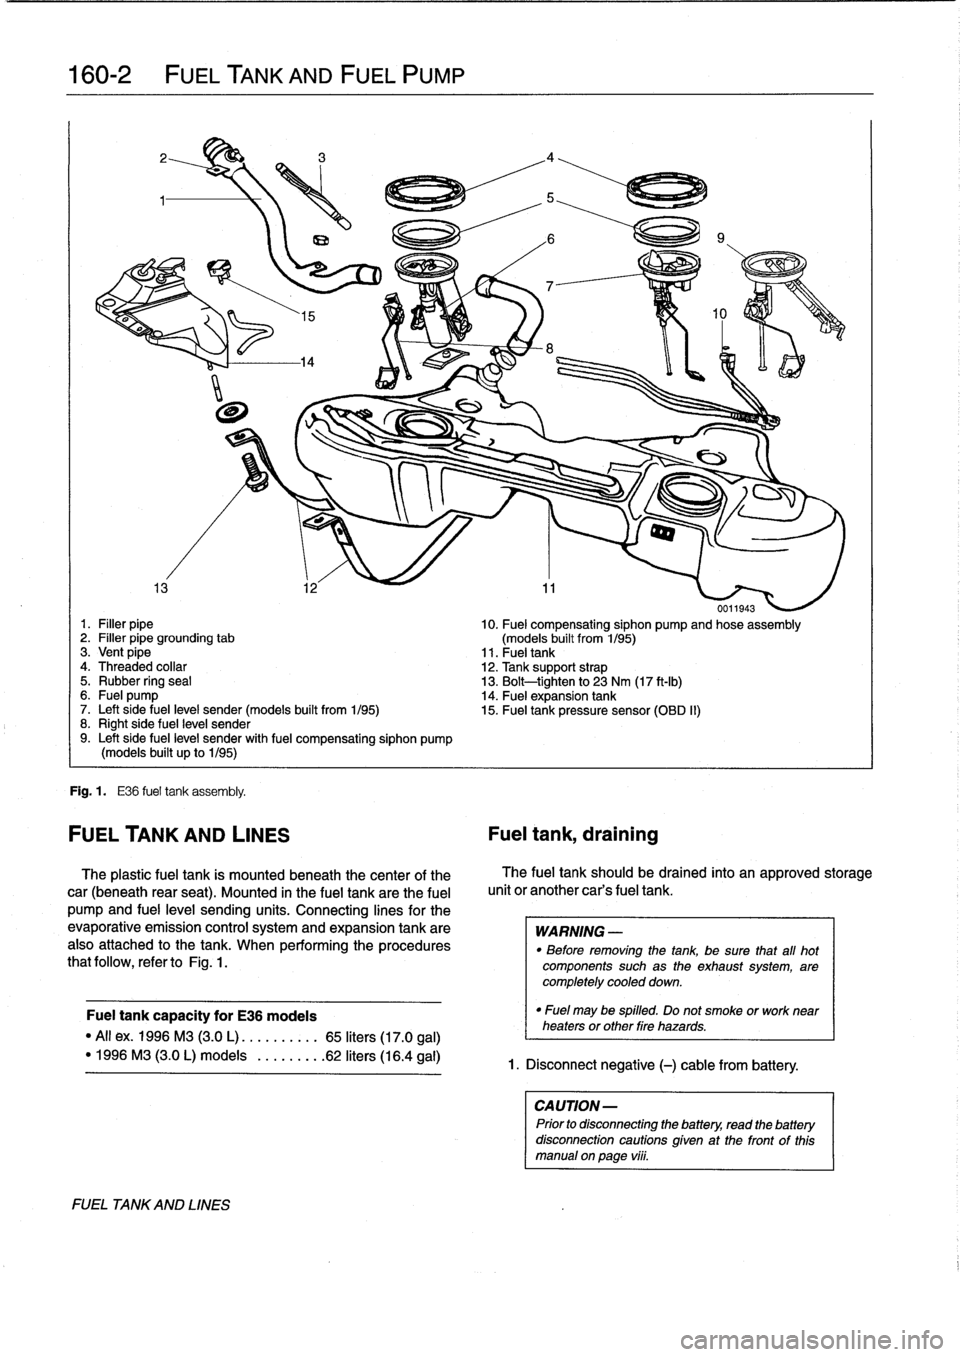 BMW 323i 1993 E36 Manual PDF 
160-2

	

FUEL
TANK
AND
FUEL
PUMP

0011943
1
.
Filler
pipe

	

10
.
Fuel
compensating
siphon
pump
and
hose
assembly
2
.
Filler
pipe
grounding
tab

	

(models
built
from
1/95)
3
.
Vent
pipe

	

11
.
F